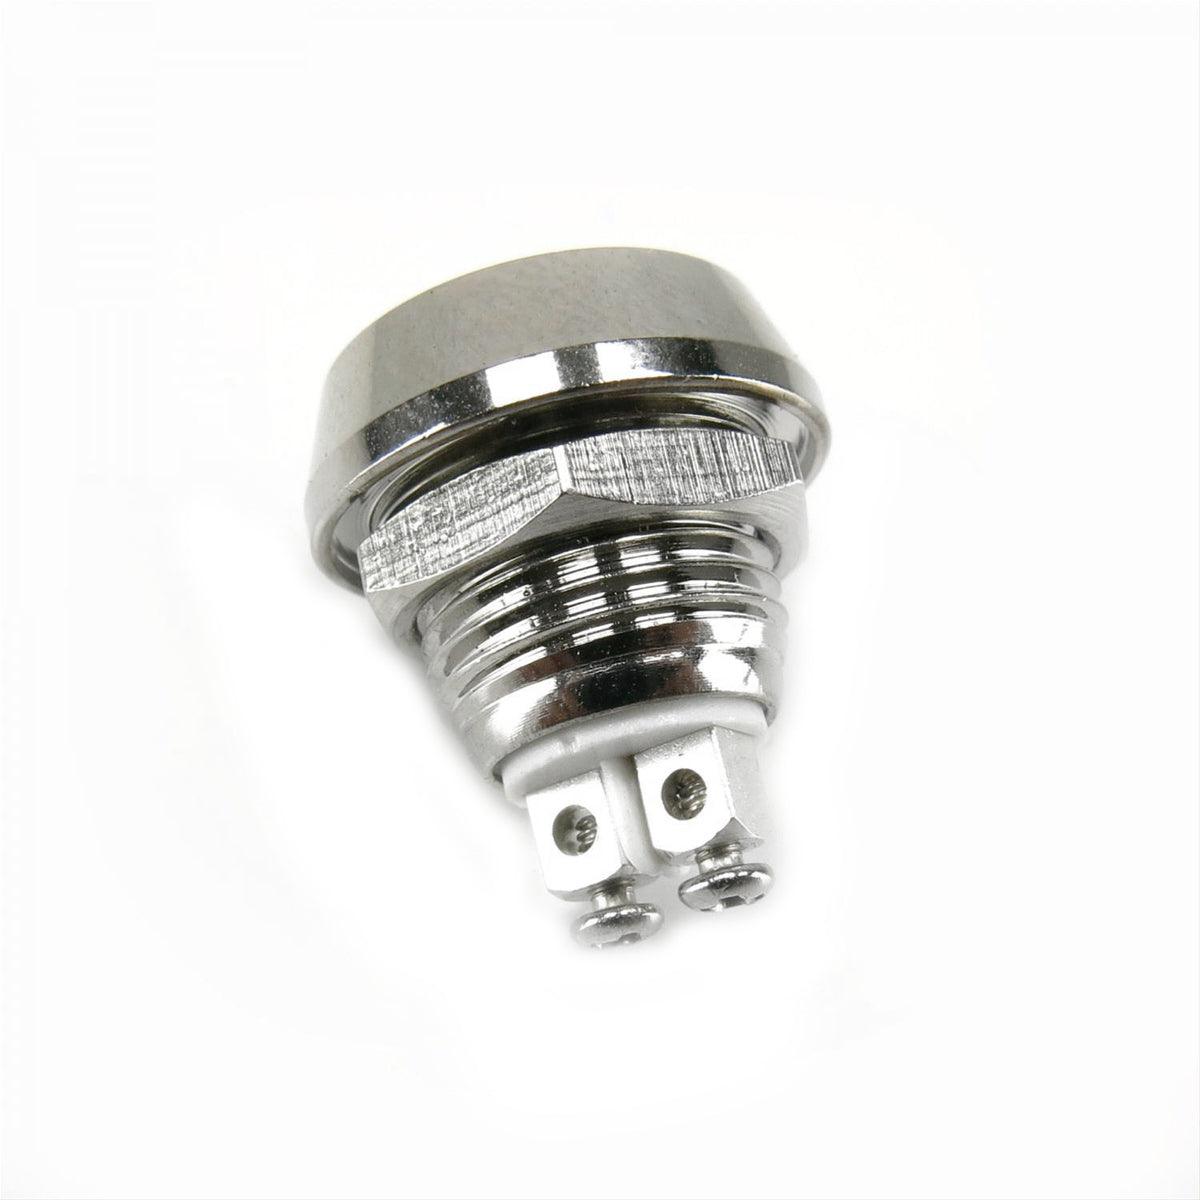 12mm Domed Momentary Billet Button - Burlile Performance Products